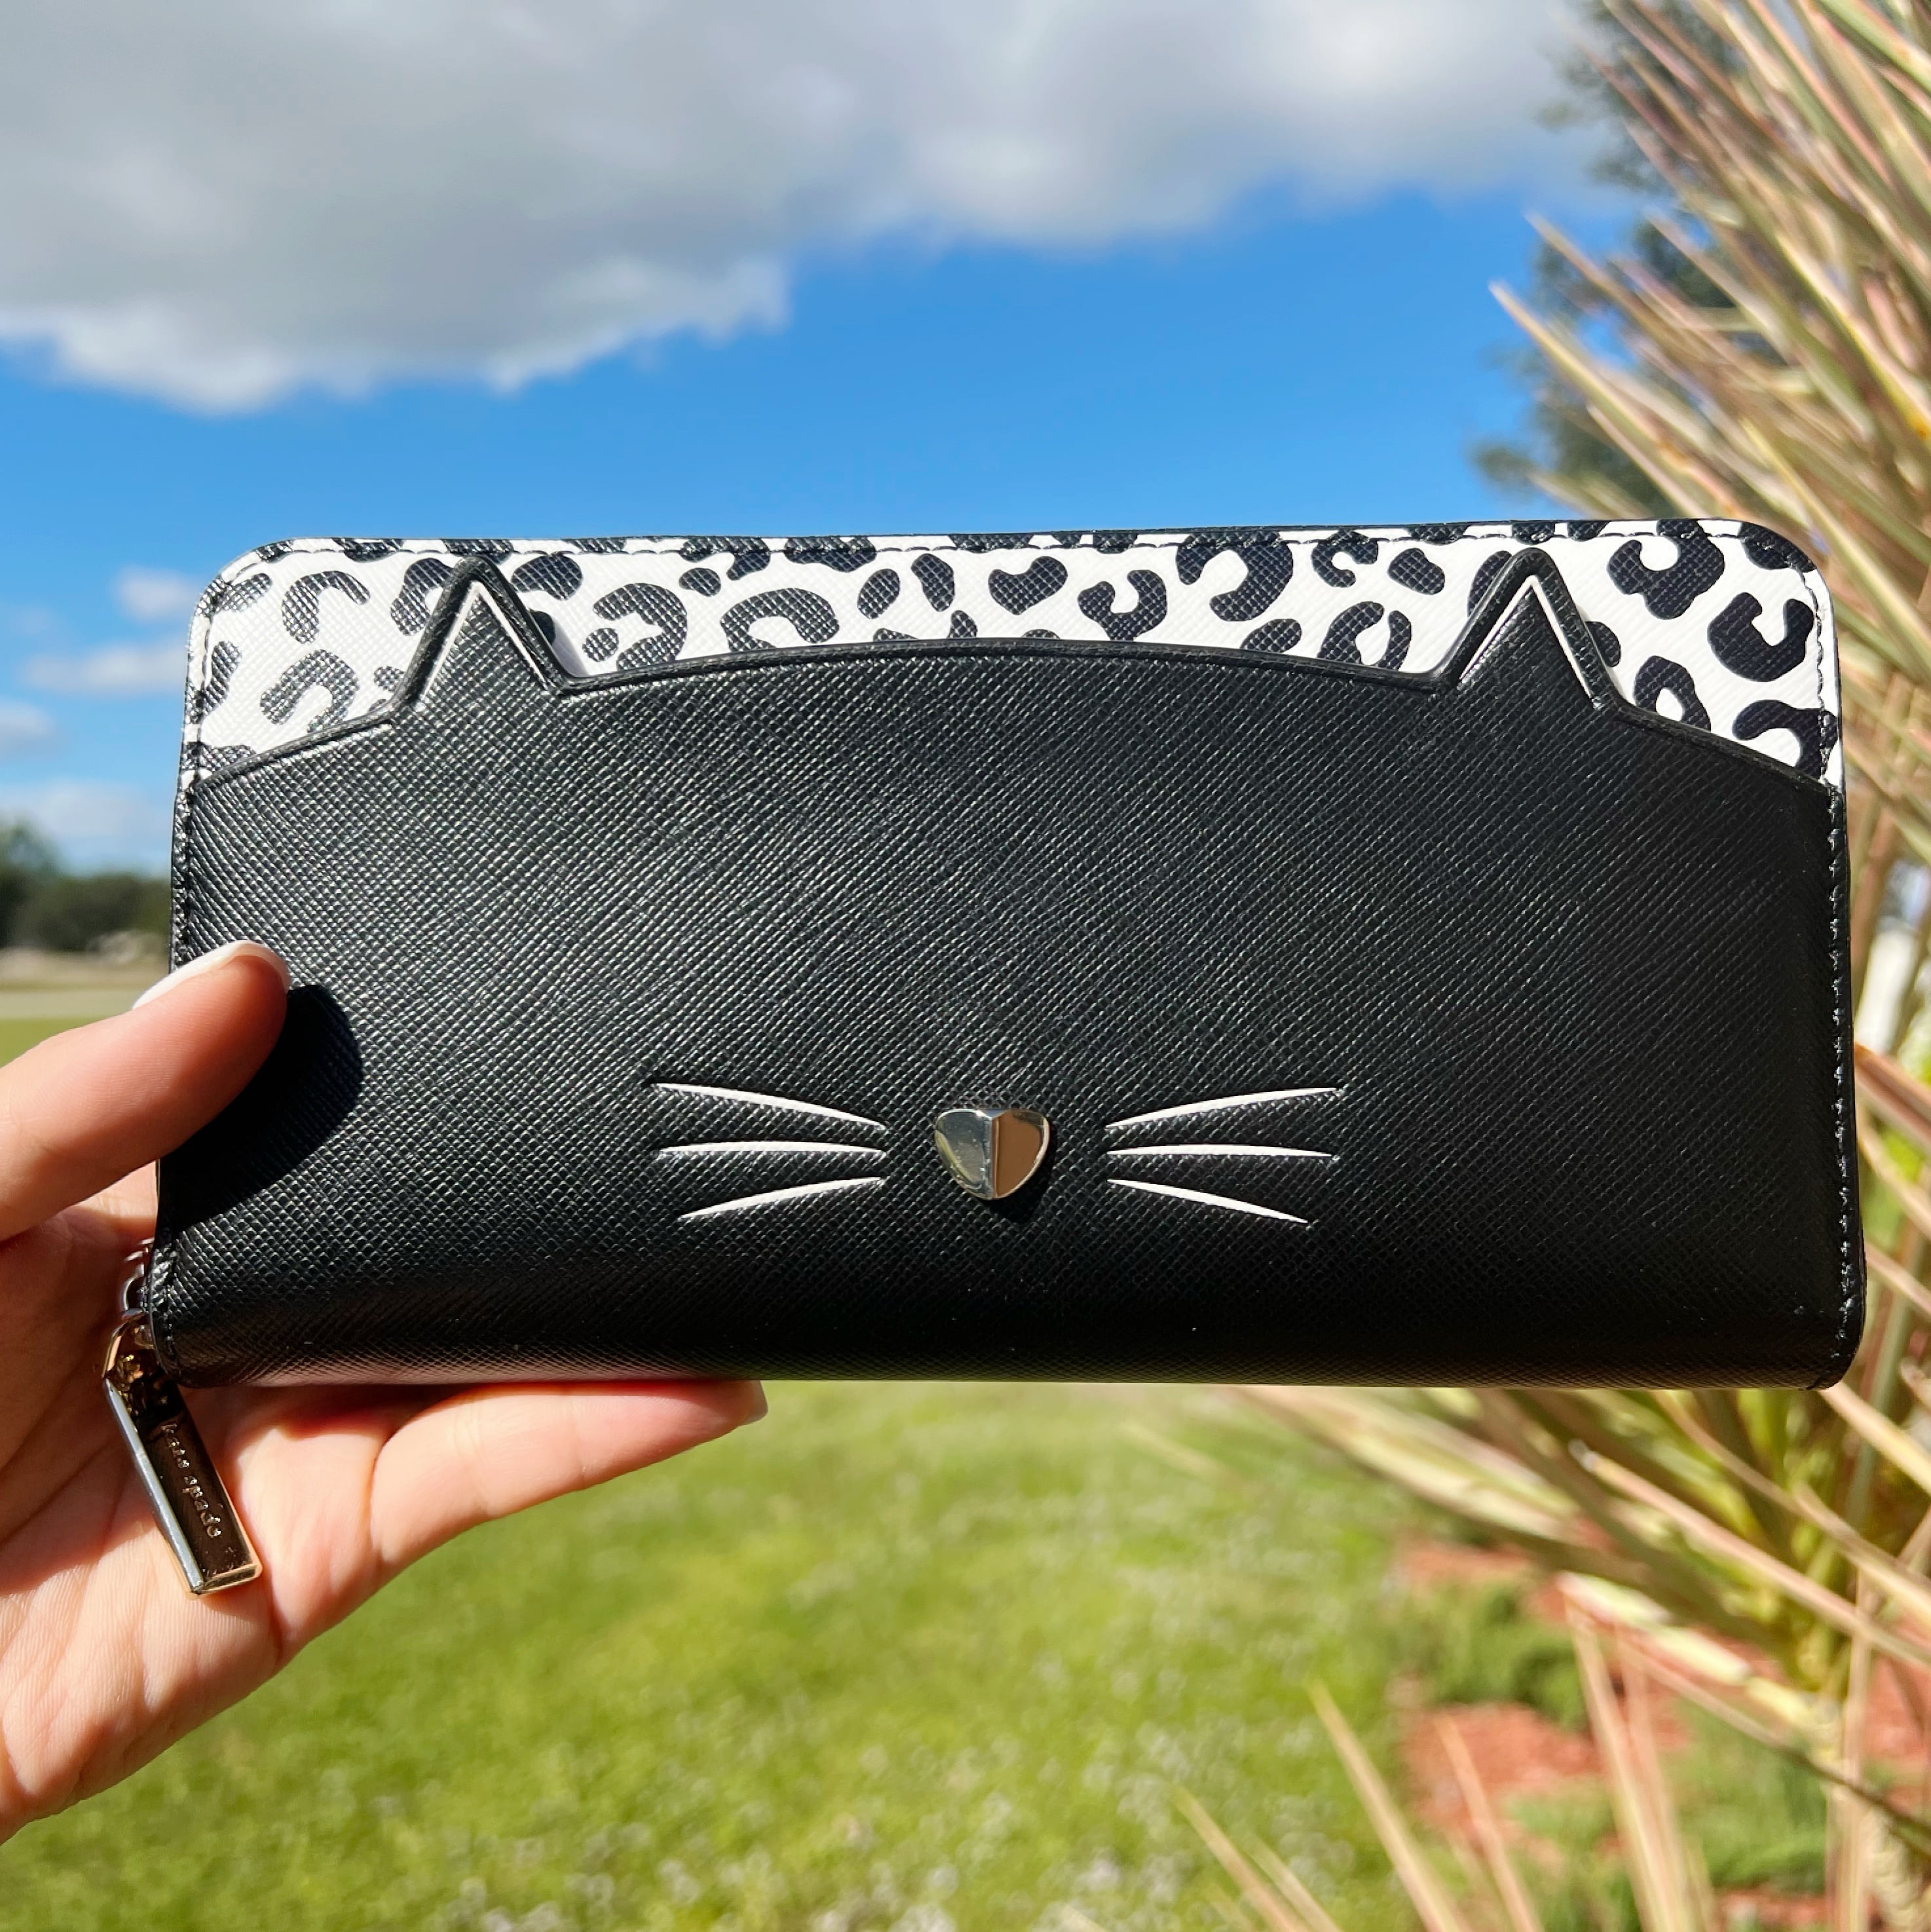 Kate Spade Meow Cat Large Continental Wallet Black Leather Leopard -  